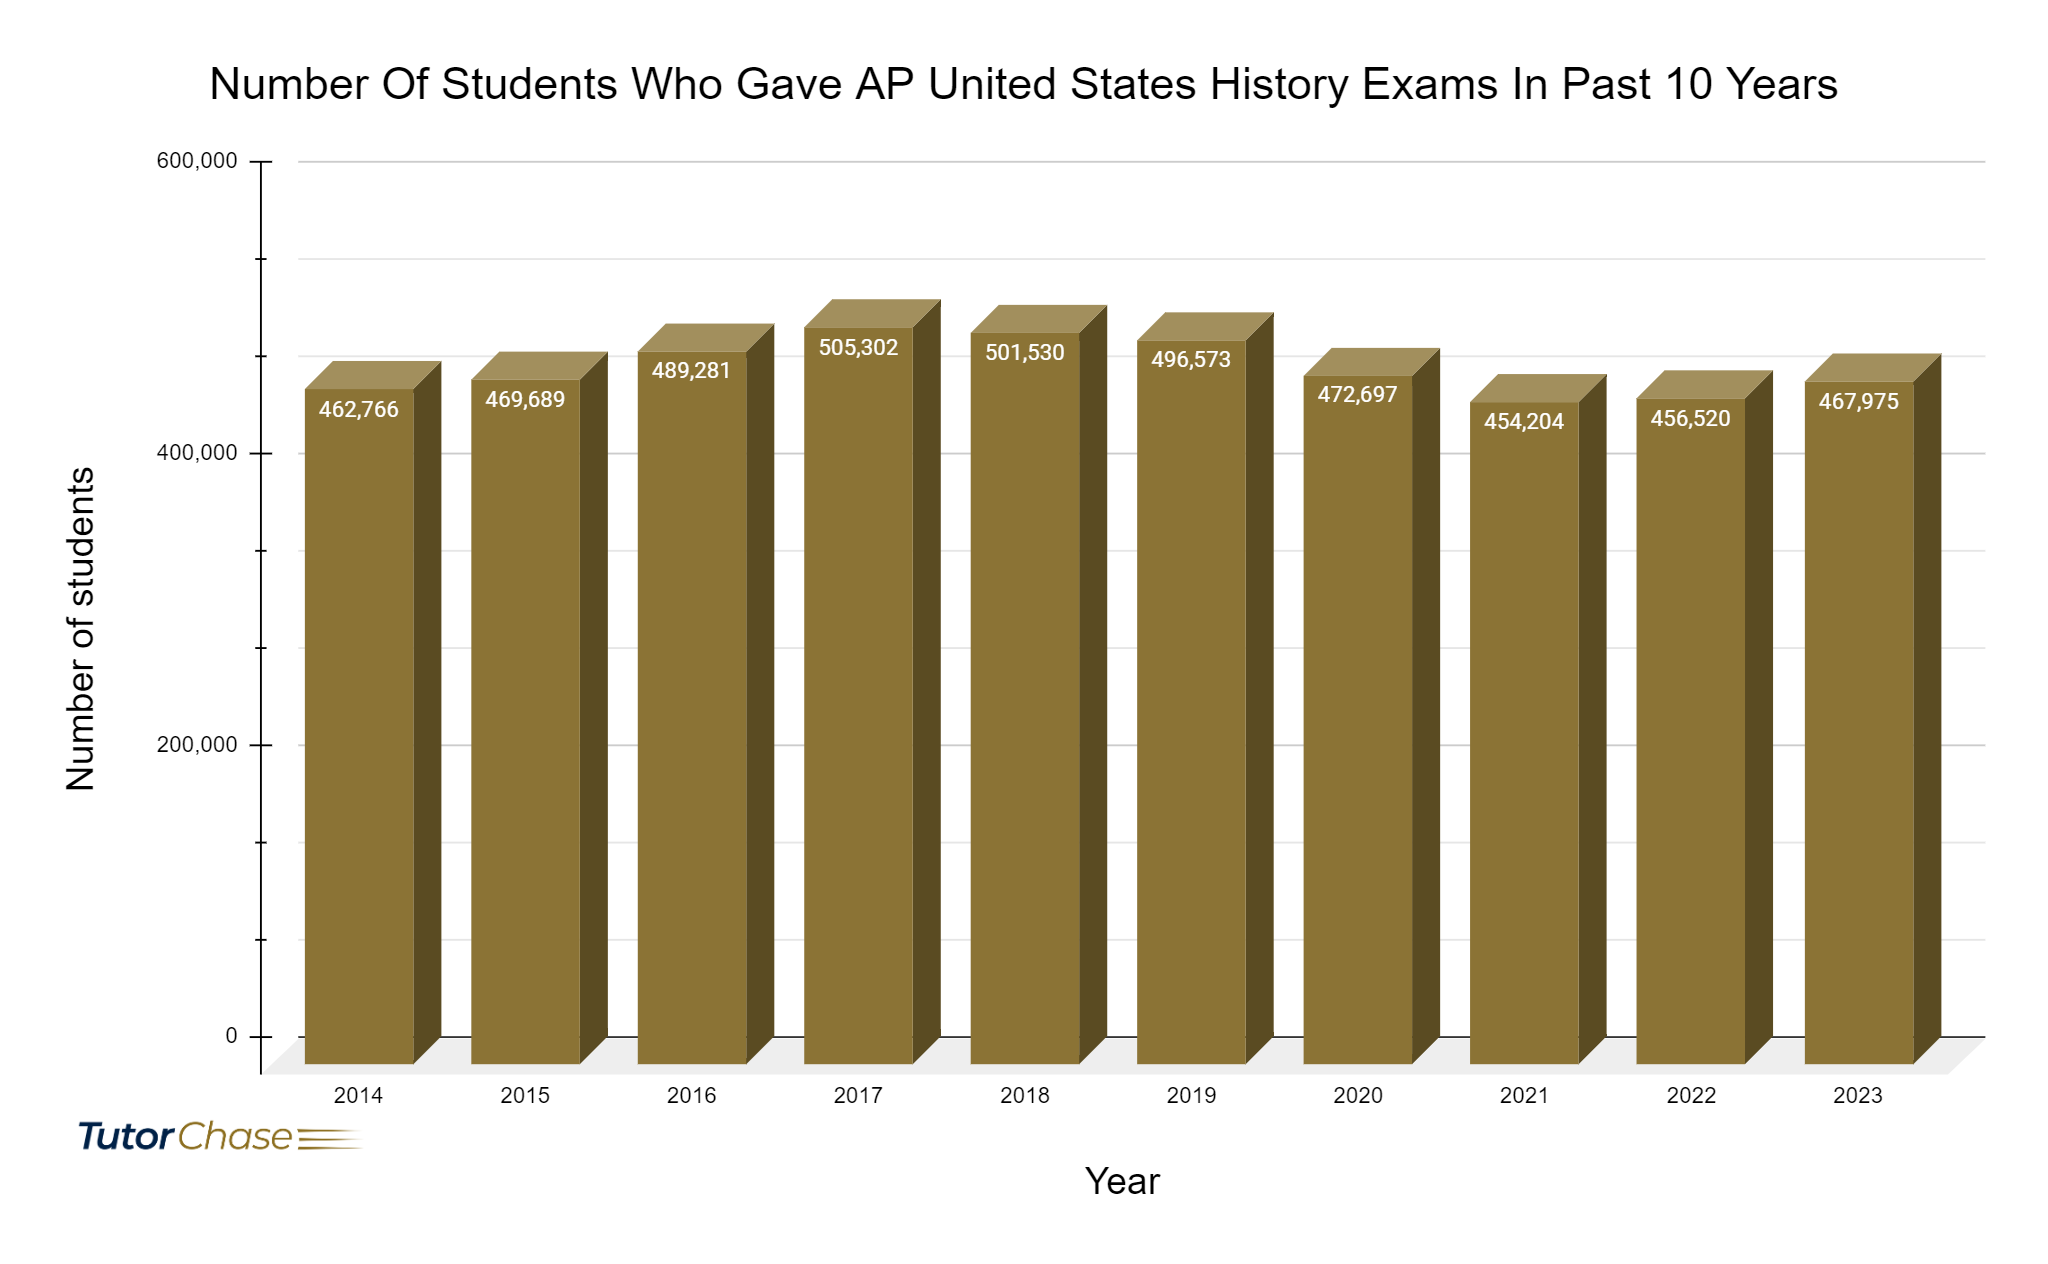 Number of students who gave AP United States History Exams